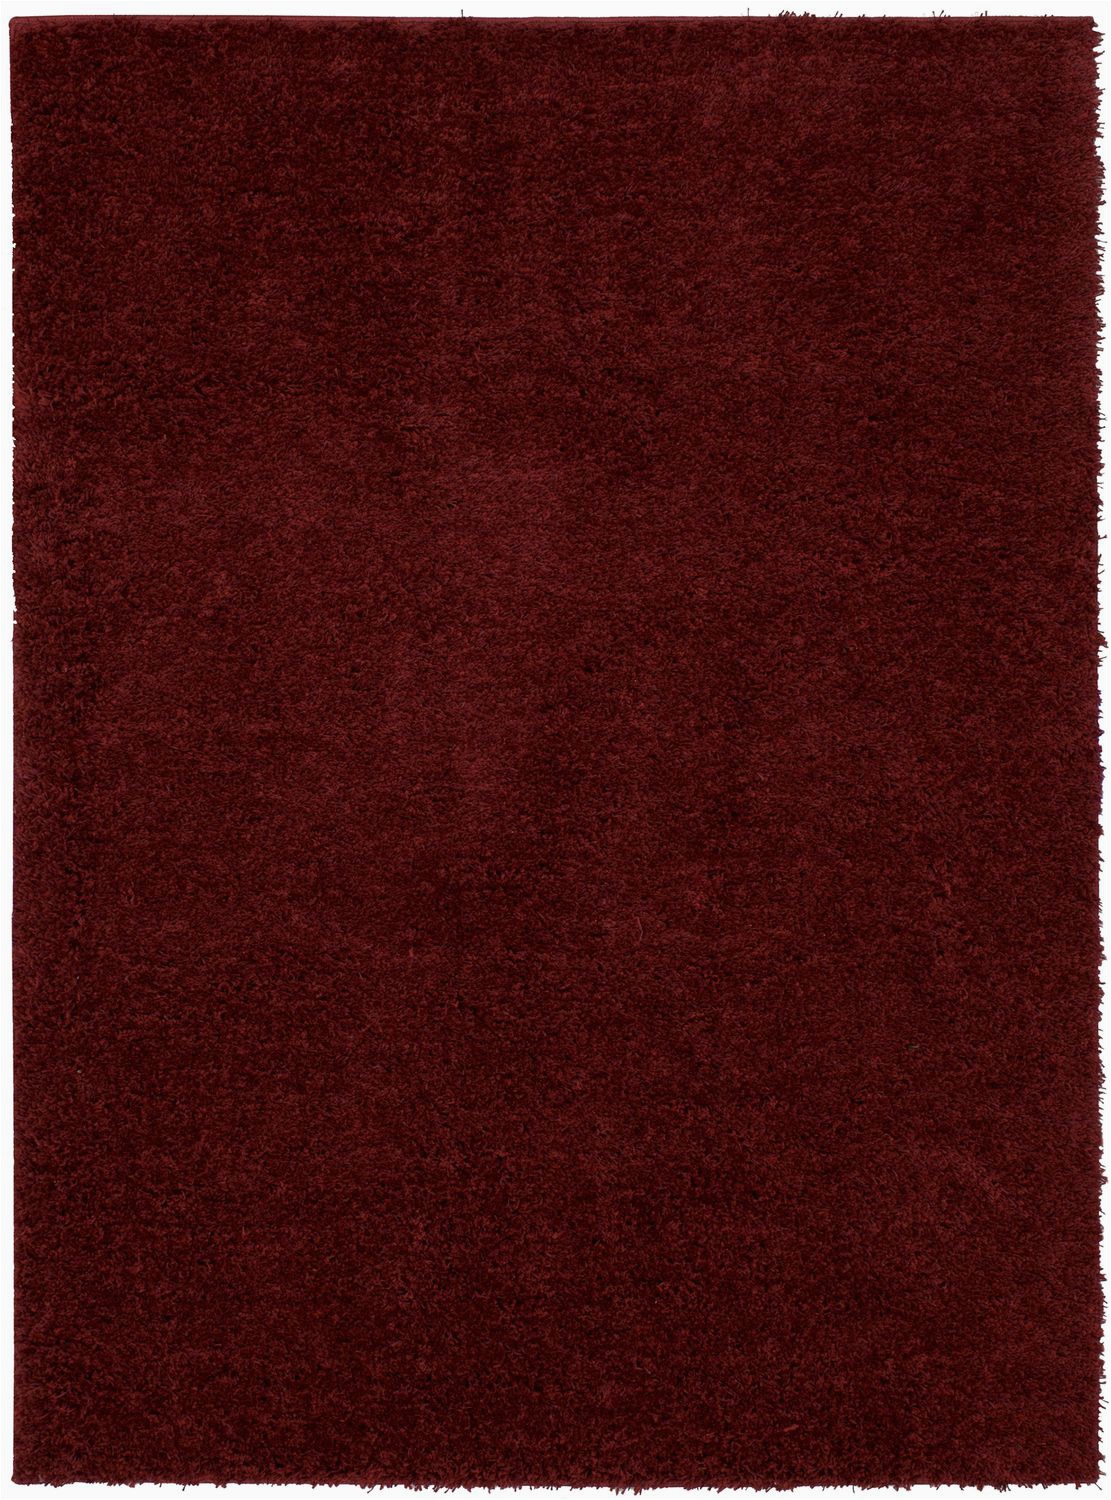 Solid Red 5×7 area Rug Hometrends Gray Willow Creek area Rug 5 X 7